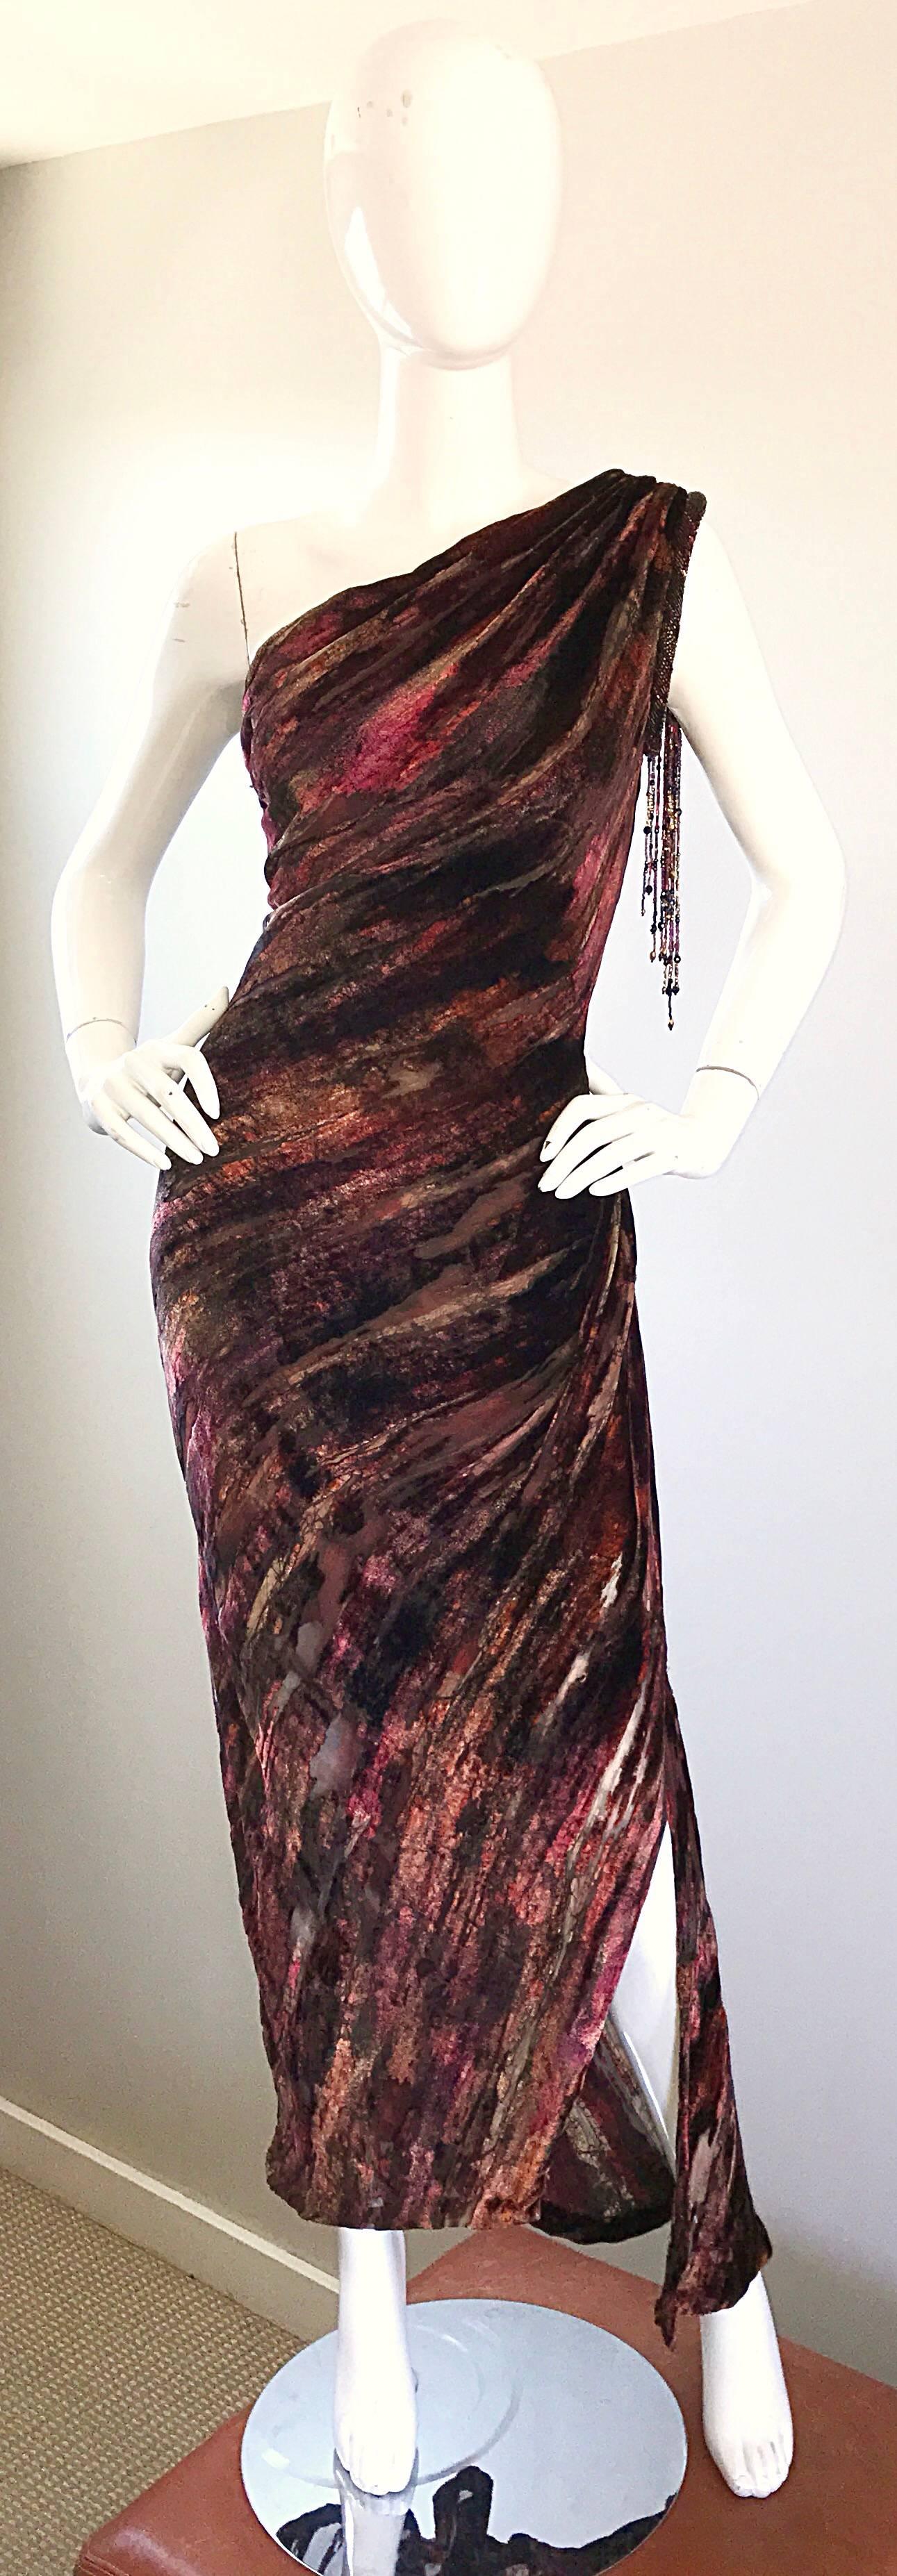 Stunning vintage 90s BOB MACKIE couture one shoulder evening dress! Features warm colors of burgundy / maroon, brown, tan, and black. Luxurious silk velvet cut-out with chiffon underlay to the knee. Slit up the left leg reveals just the right amount